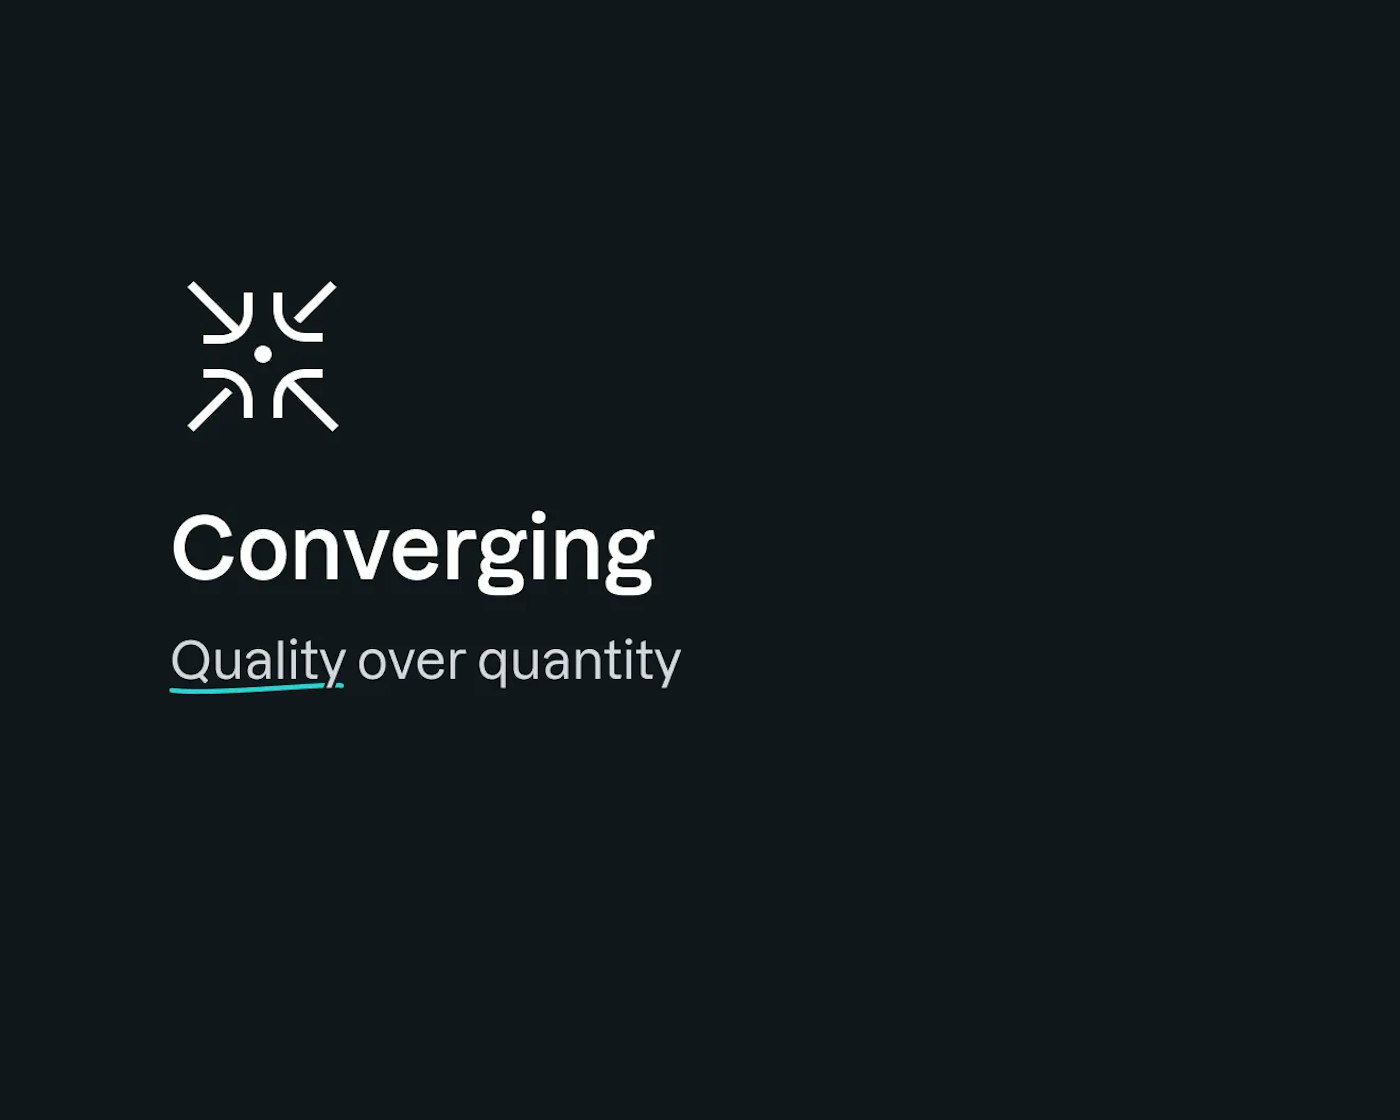 Near black image that shows a white line icon of arrows pointing inwards, a title that says 'Converging' and the text 'Quality over quantity'. The word quality has a turqoise scribbly underline.